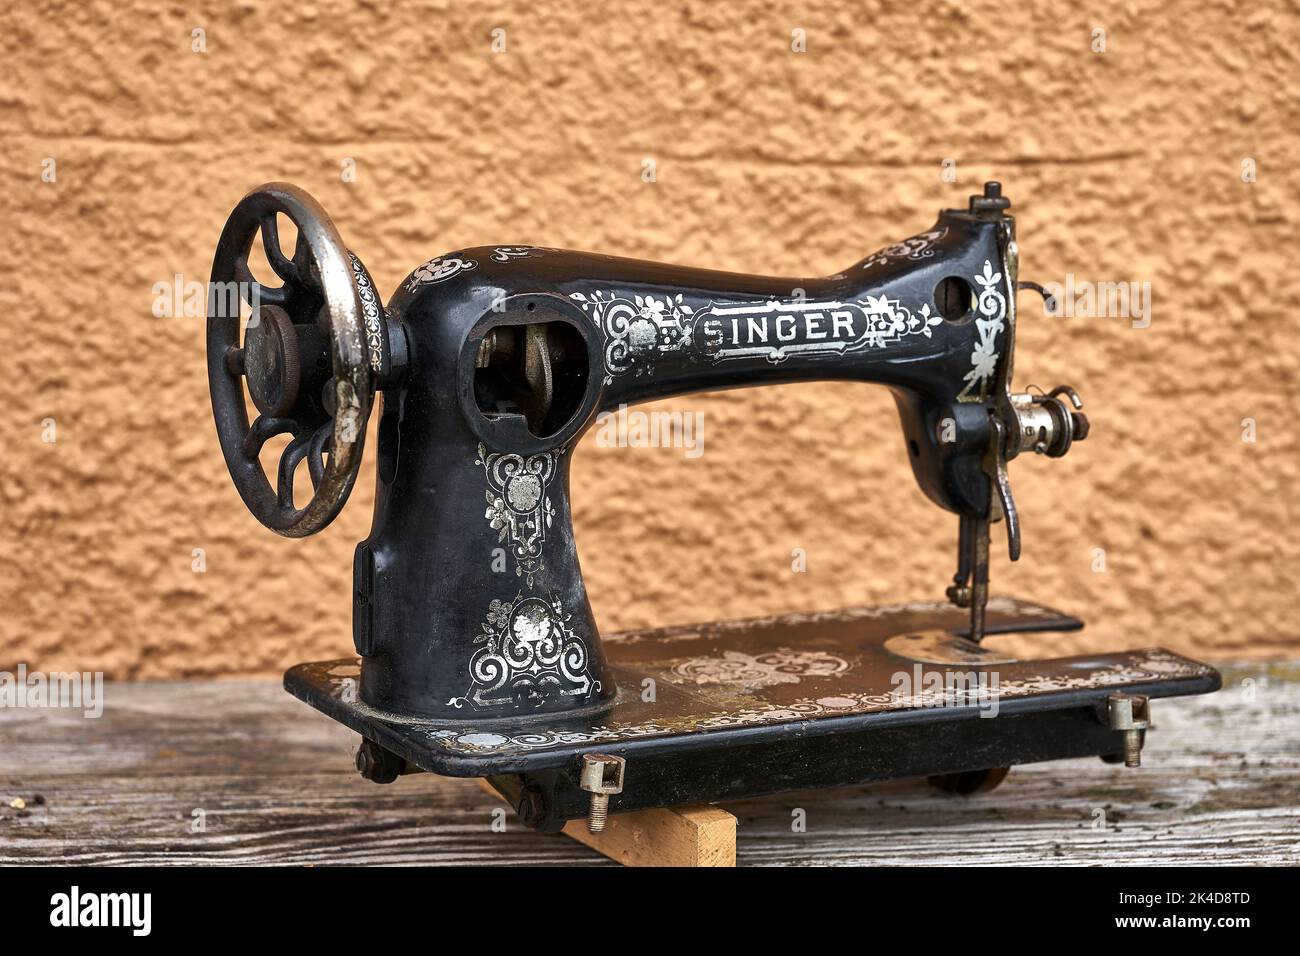 Heavy duty vintage Singer sewing machines for sale as seen in a shop in  Yangon, Myanmar Stock Photo - Alamy